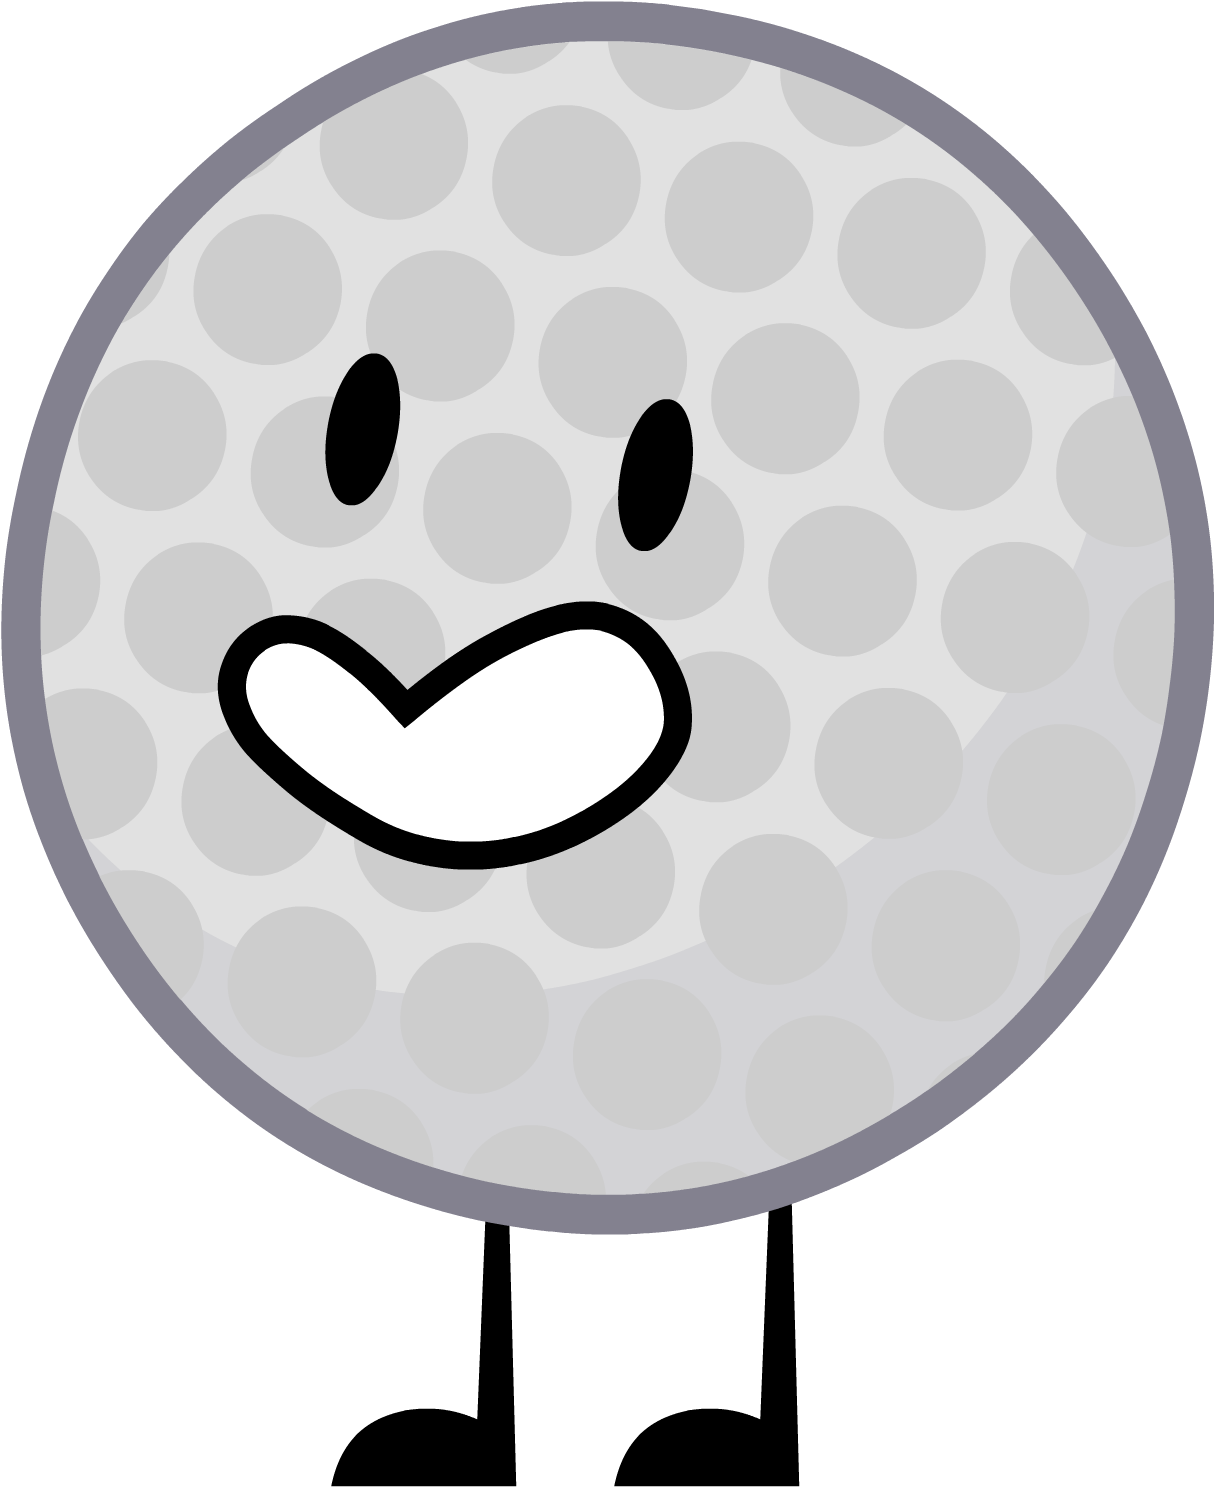 Download and share clipart about Golf Ball 1 - Golf Ball Bfdi Png